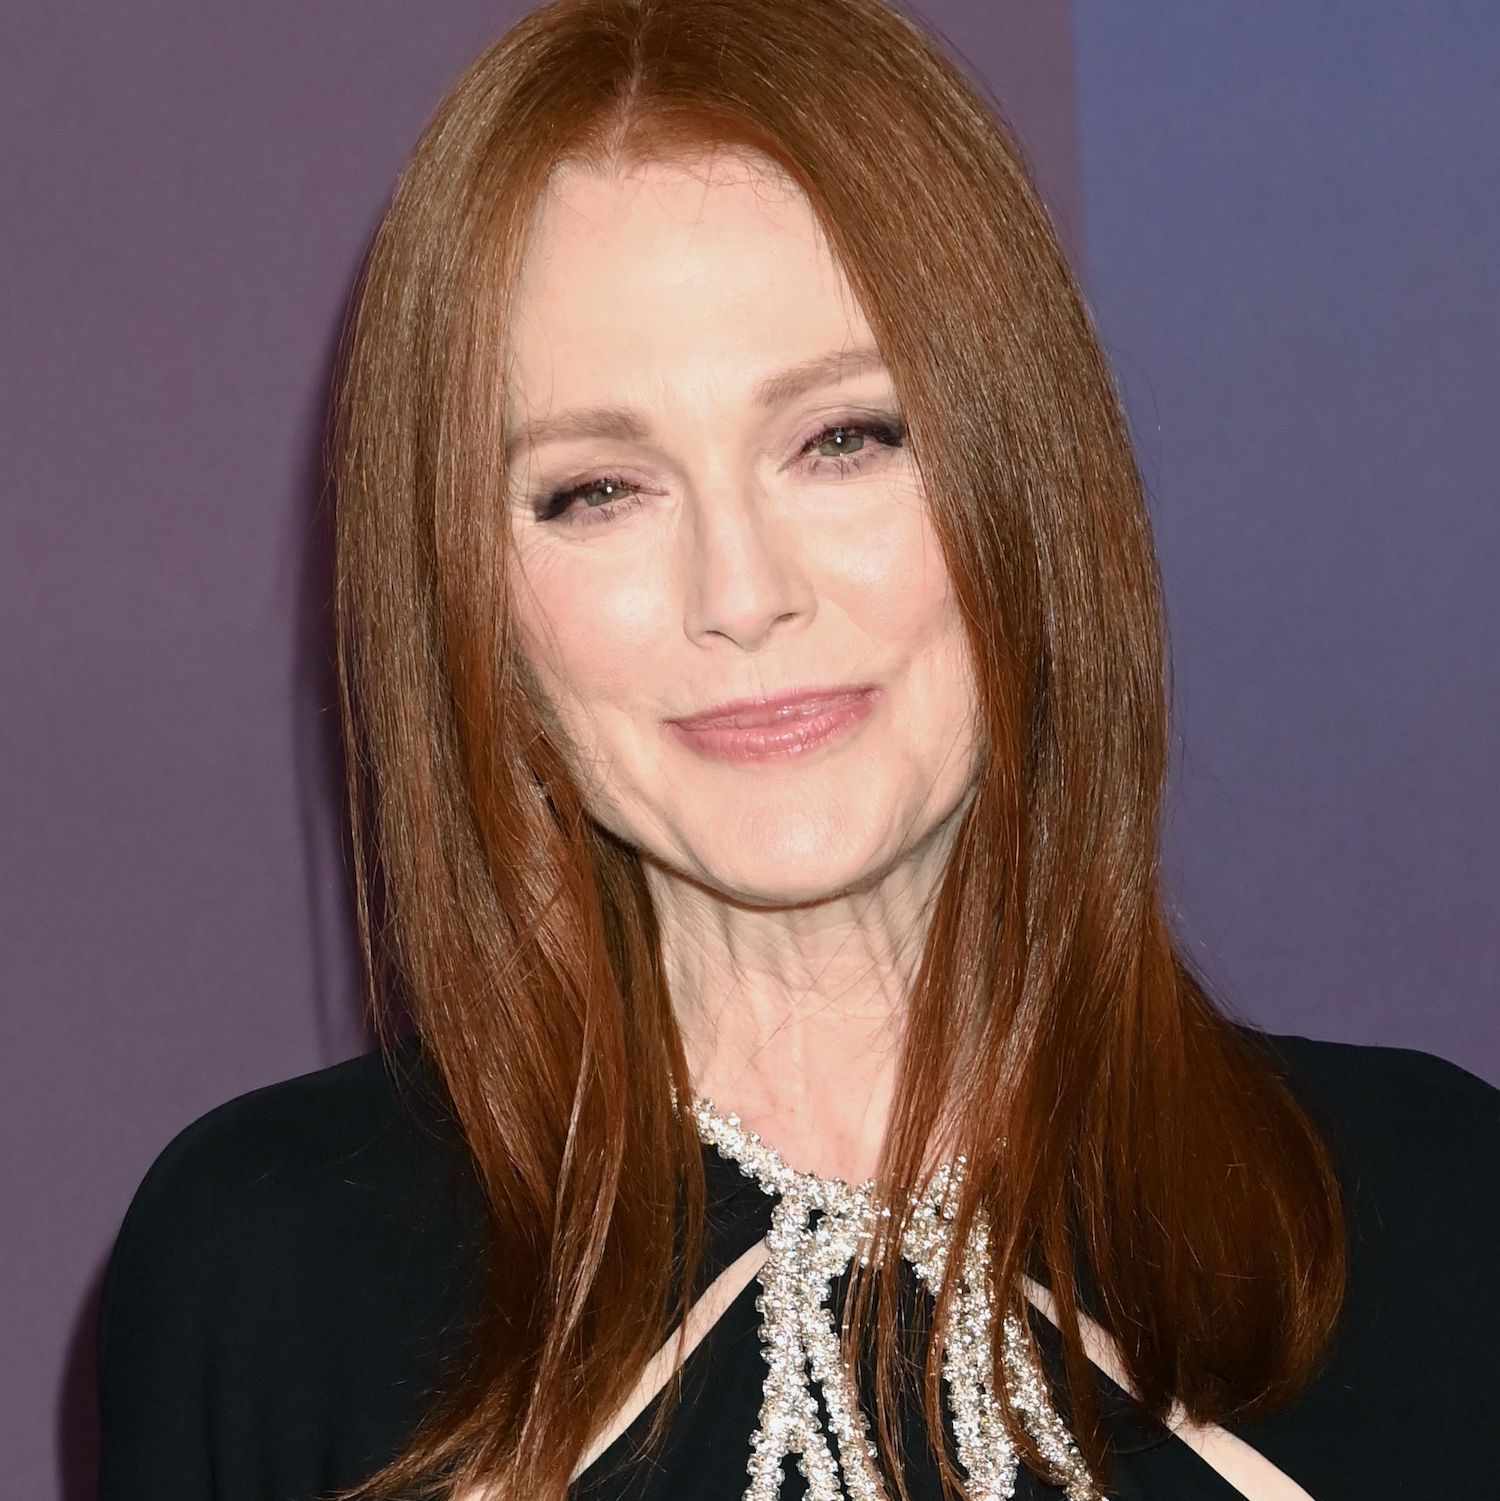 Julianne Moore wears a mid-length hairstyle with sleek, subtle layers